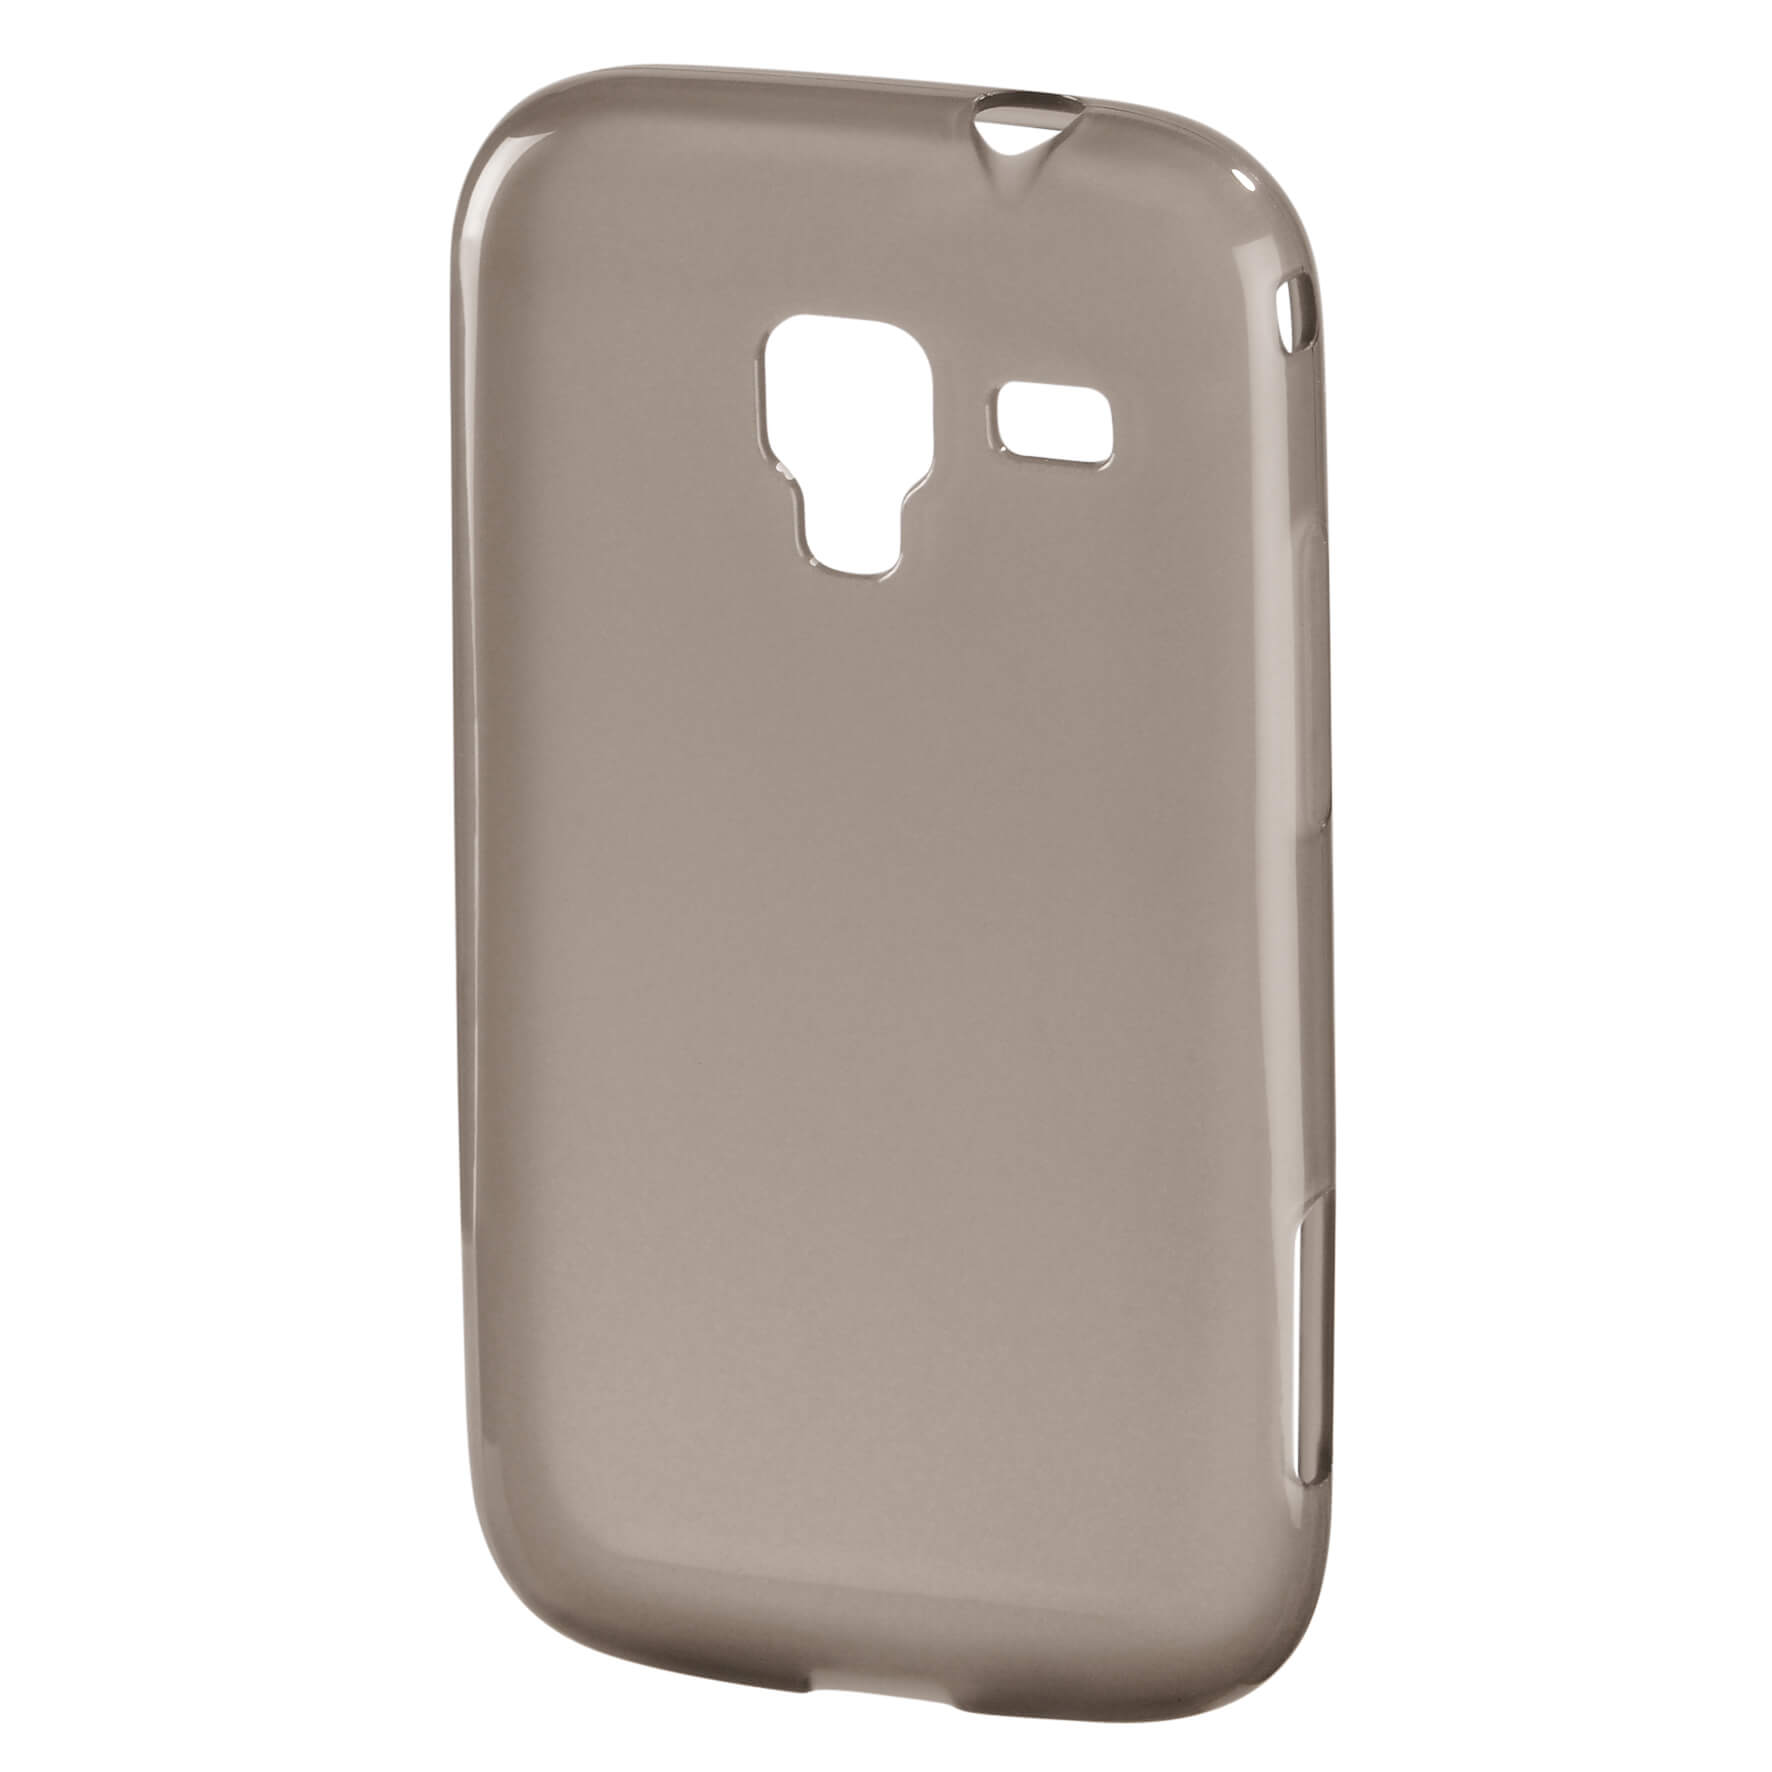 Crystal Mobile Phone Cover fo r Samsung Galaxy Ace 2, grey